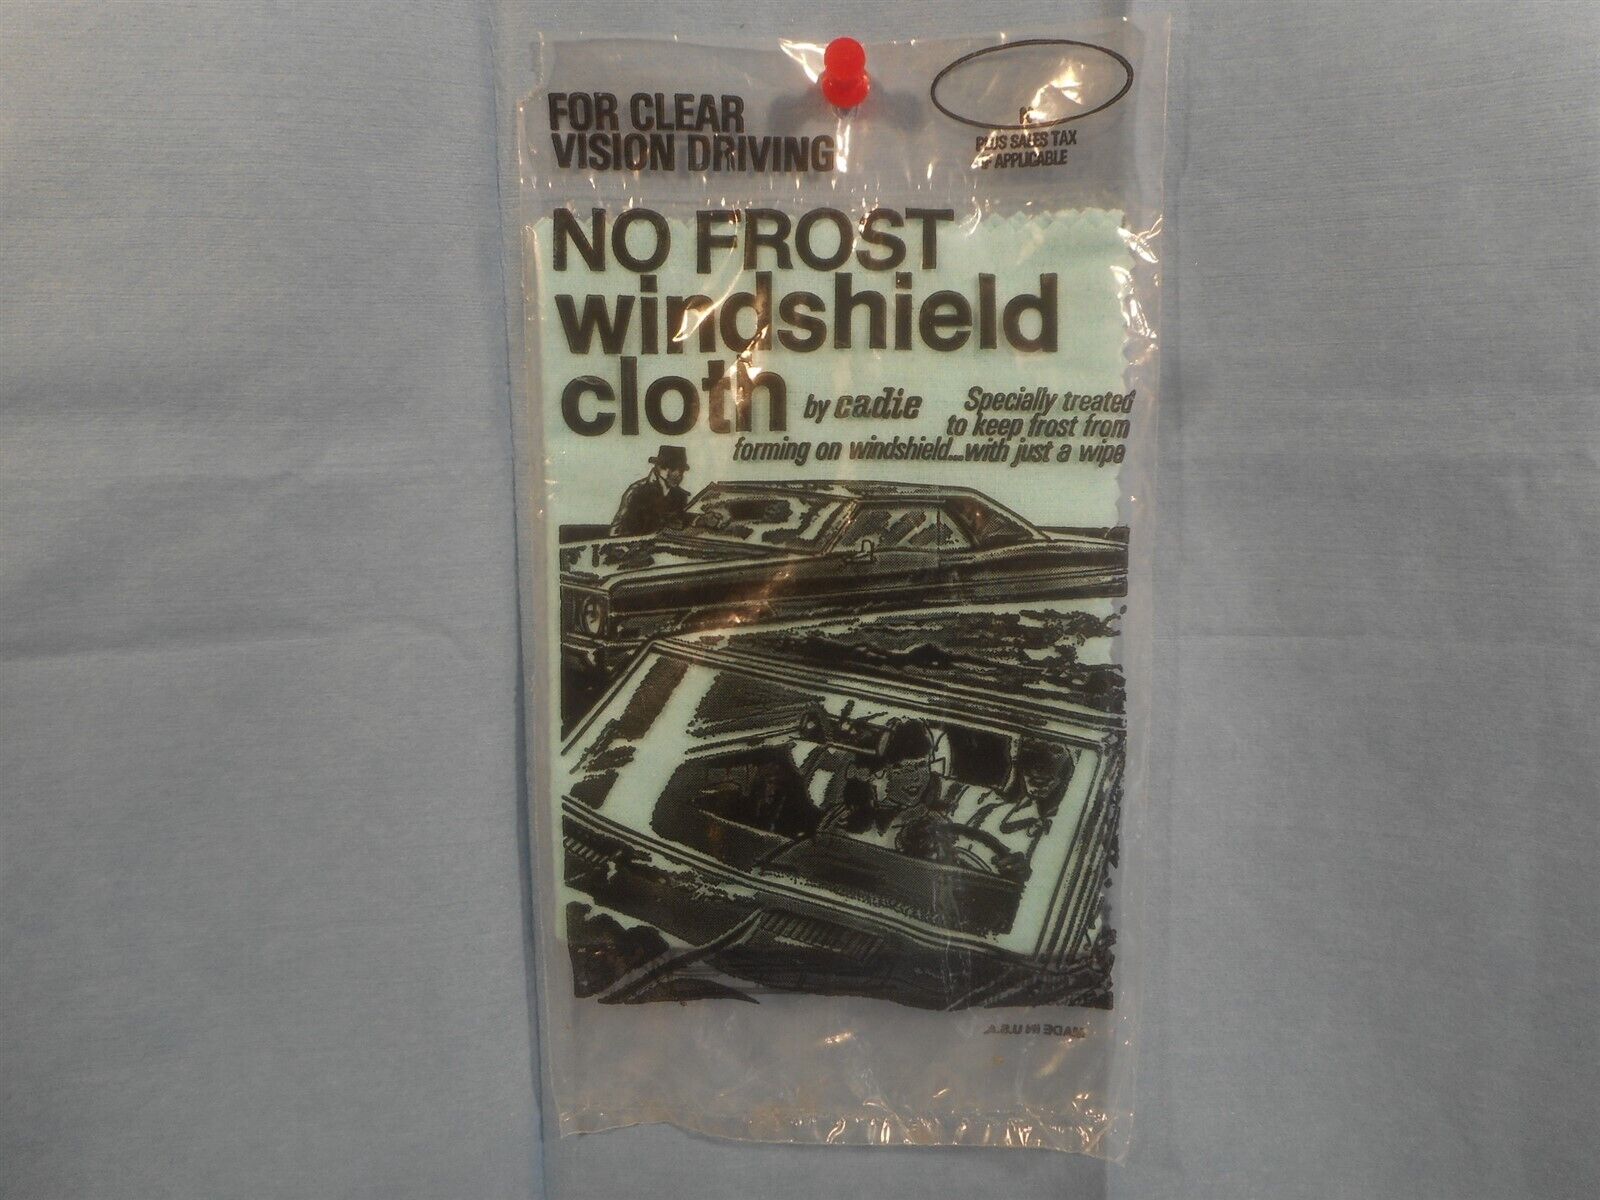 Vintage NOS 1960s or 70s Cadie Paterson N.J. NO FROST Windshield Cloth car auto